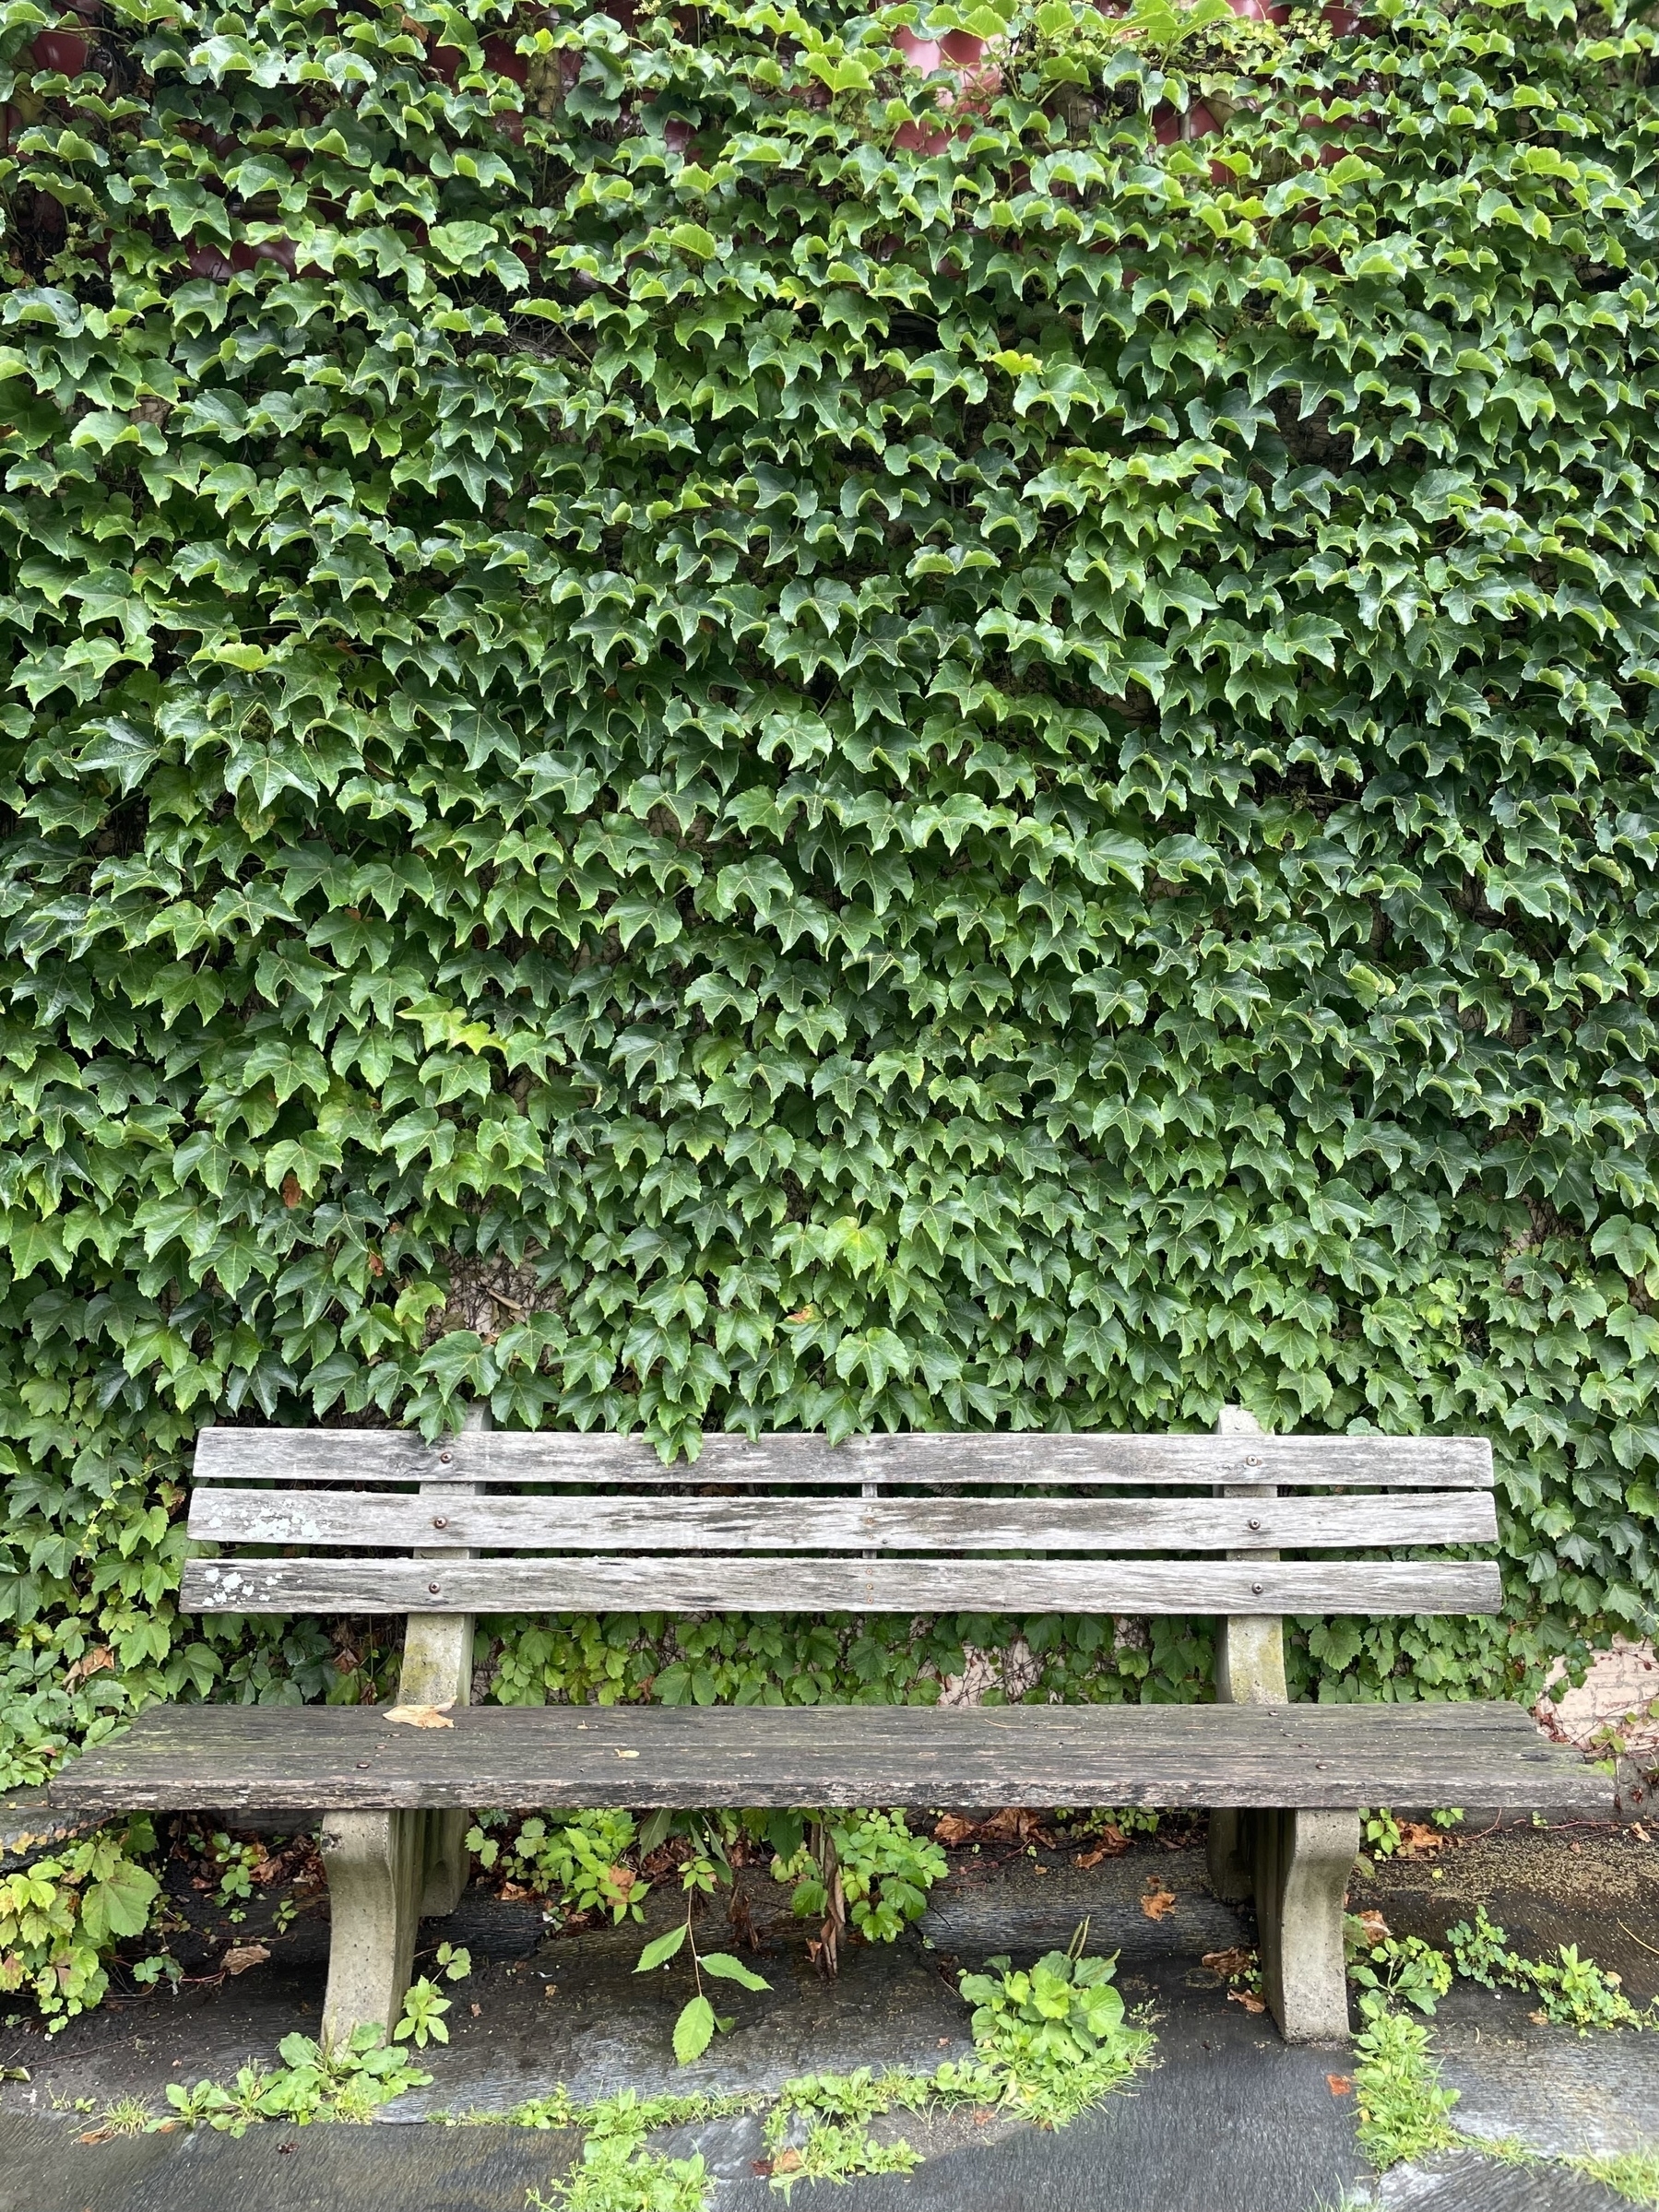 Wood bench in front of an ivy-covered wall